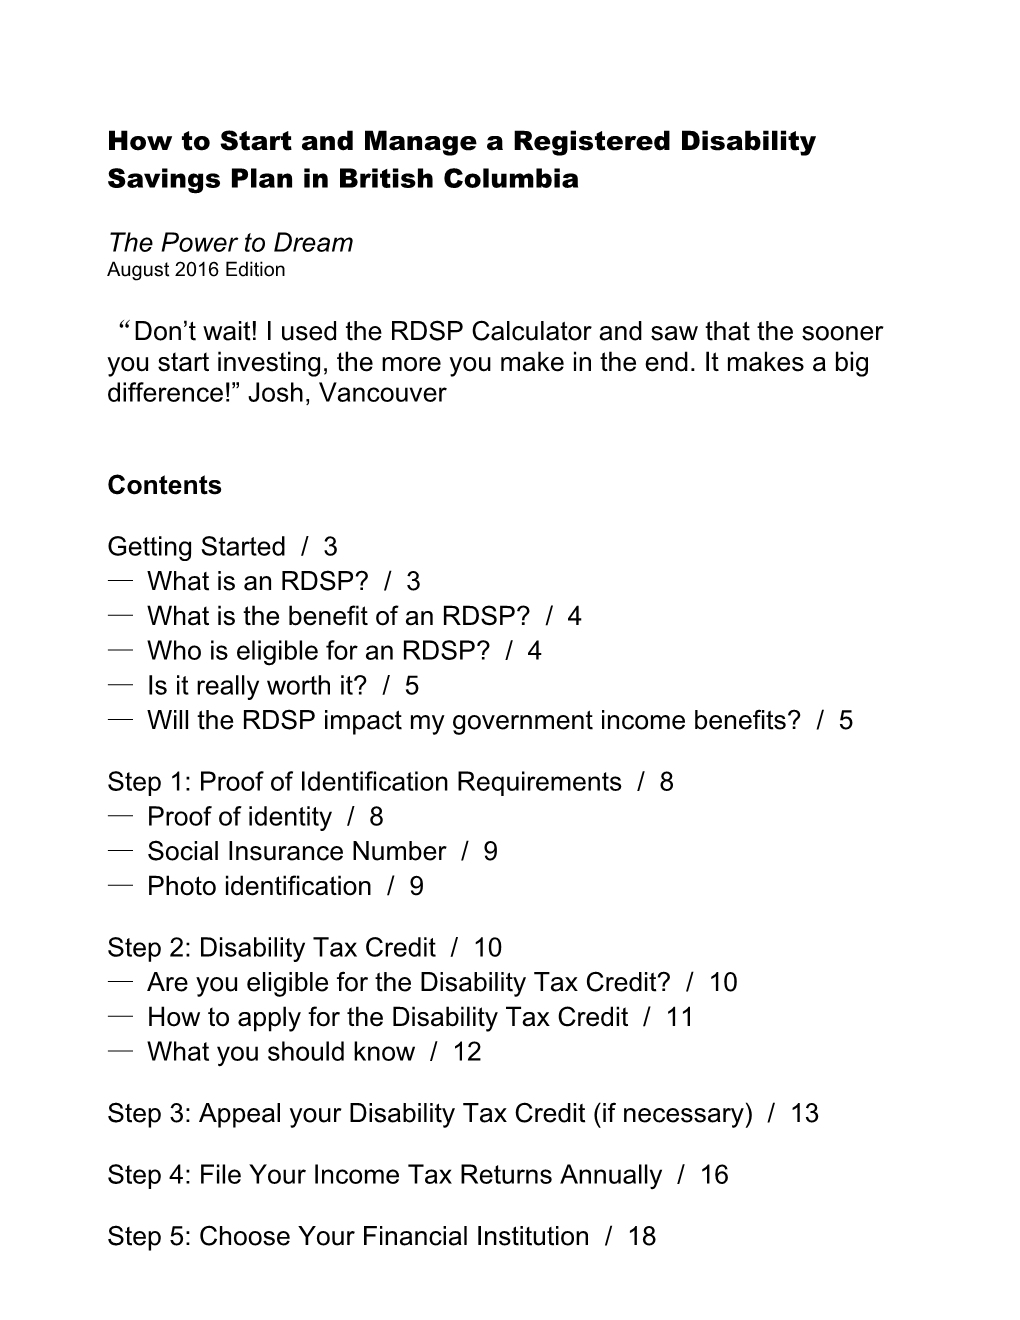 How to Start and Manage a Registered Disability Savings Plan in British Columbia